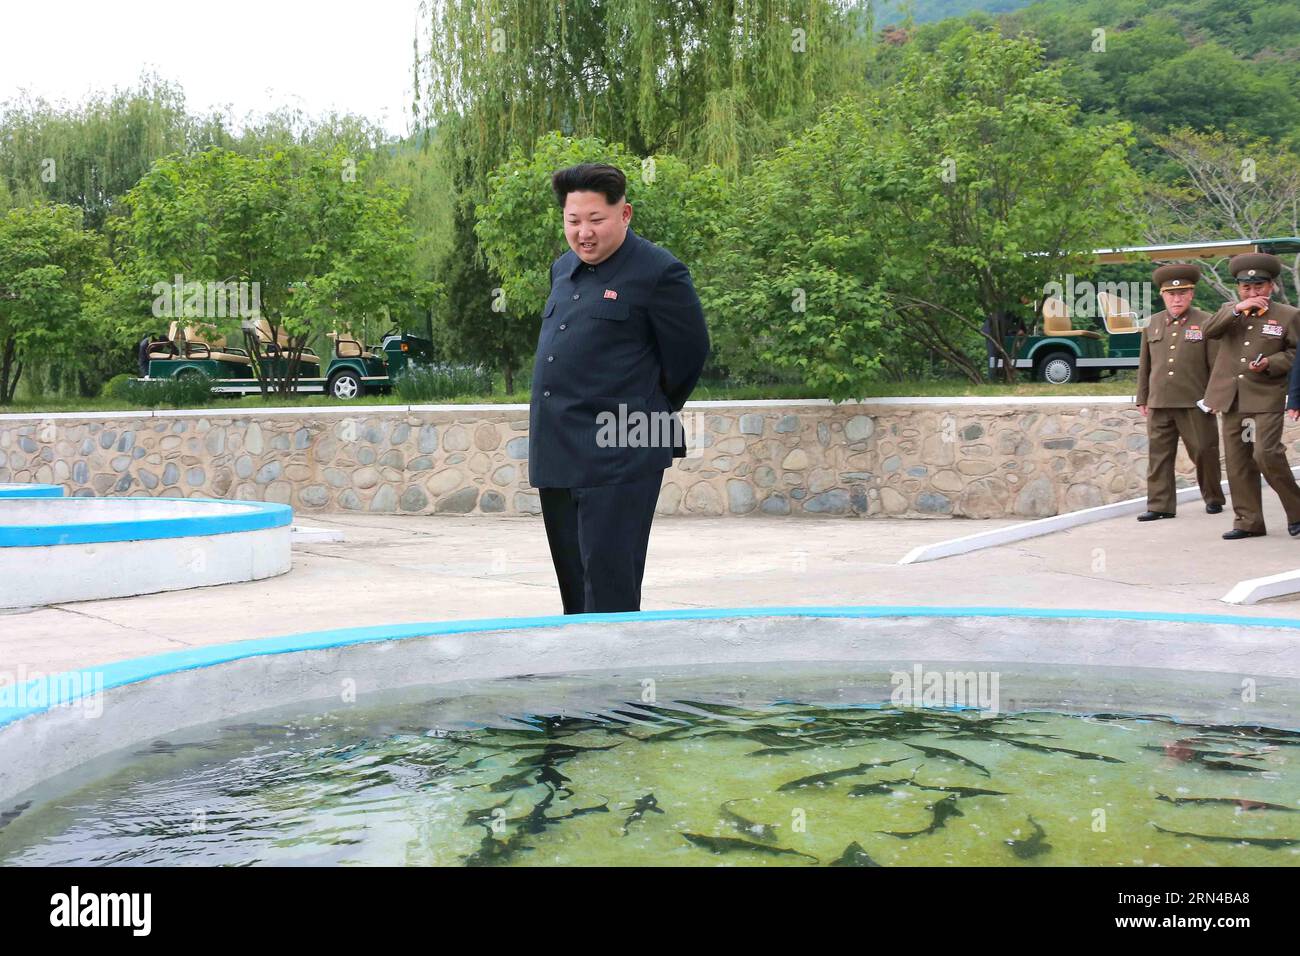 (150515) -- PYONGYANG, May 15, 2015 -- Photo provided by Korean Central News Agency () on May 15, 2015 shows top leader of the Democratic People s Republic of Korea (DPRK) Kim Jong Un recently inspecting Sinchang fish farm under Unit 810 of the Korean People s Army (KPA). ) DPRK-KIM JONG UN-SINCHANG FISH FARM-INSPECTION KCNA PUBLICATIONxNOTxINxCHN   Pyongyang May 15 2015 Photo provided by Korean Central News Agency ON May 15 2015 Shows Top Leader of The Democratic Celebrities S Republic of Korea DPRK Kim Jong UN Recently inspecting  Fish Farm Under Unit 810 of The Korean Celebrities S Army KPA Stock Photo